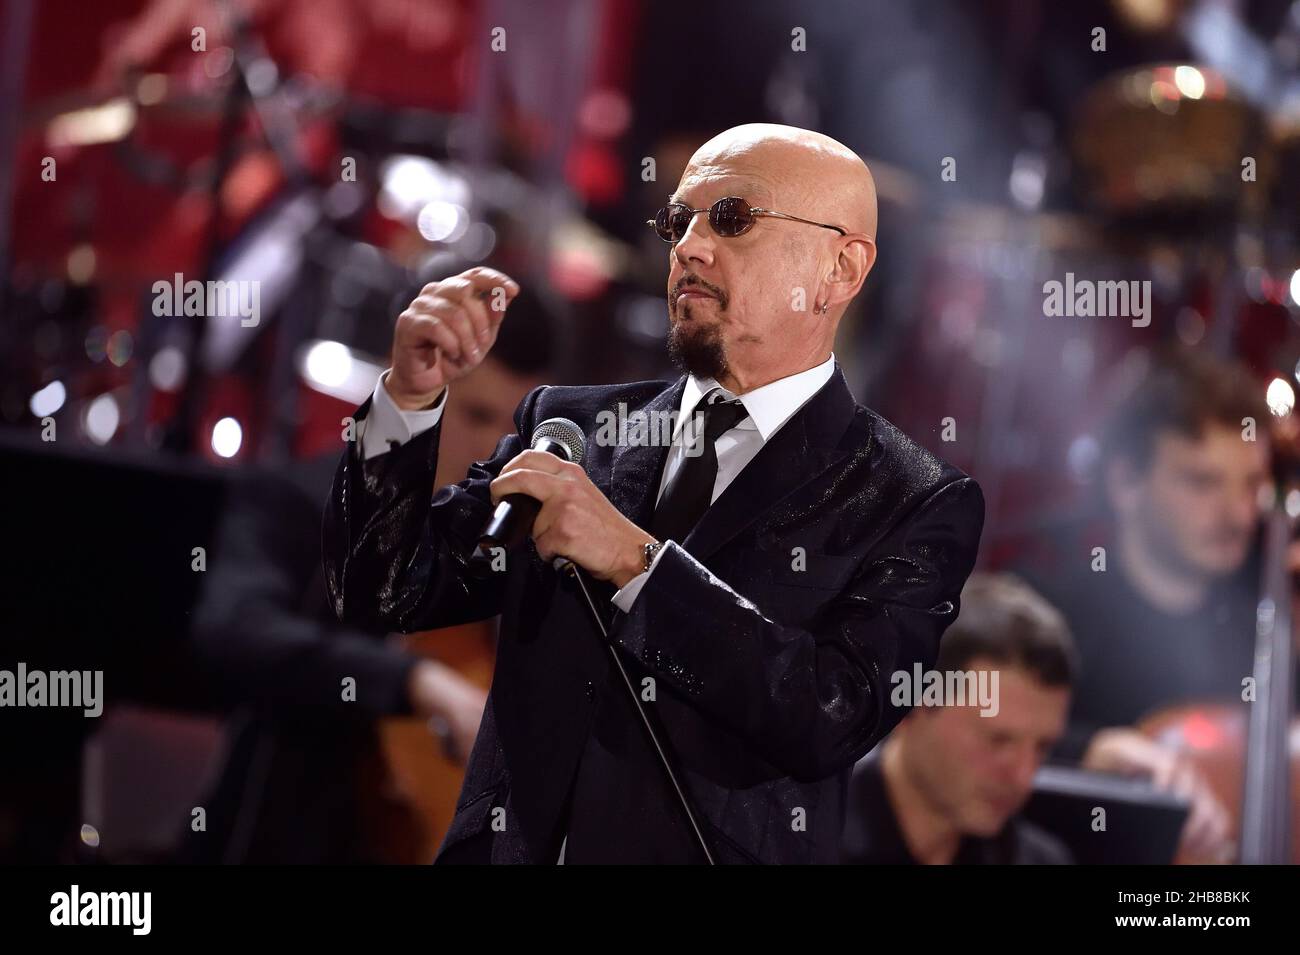 Rome, Italy. 17th Dec, 2021. Rome, Italy. 17th Dec, 2021. The singer Enrico Ruggeri at the twenty-ninth edition of the Christmas Concert 2021. Auditorium Conciliazione, The concert will go on the evening of 24 December on Canale 5. Rome (Italy) 16 December 2021 Credit: dpa picture alliance/Alamy Live News Credit: dpa picture alliance/Alamy Live News Stock Photo